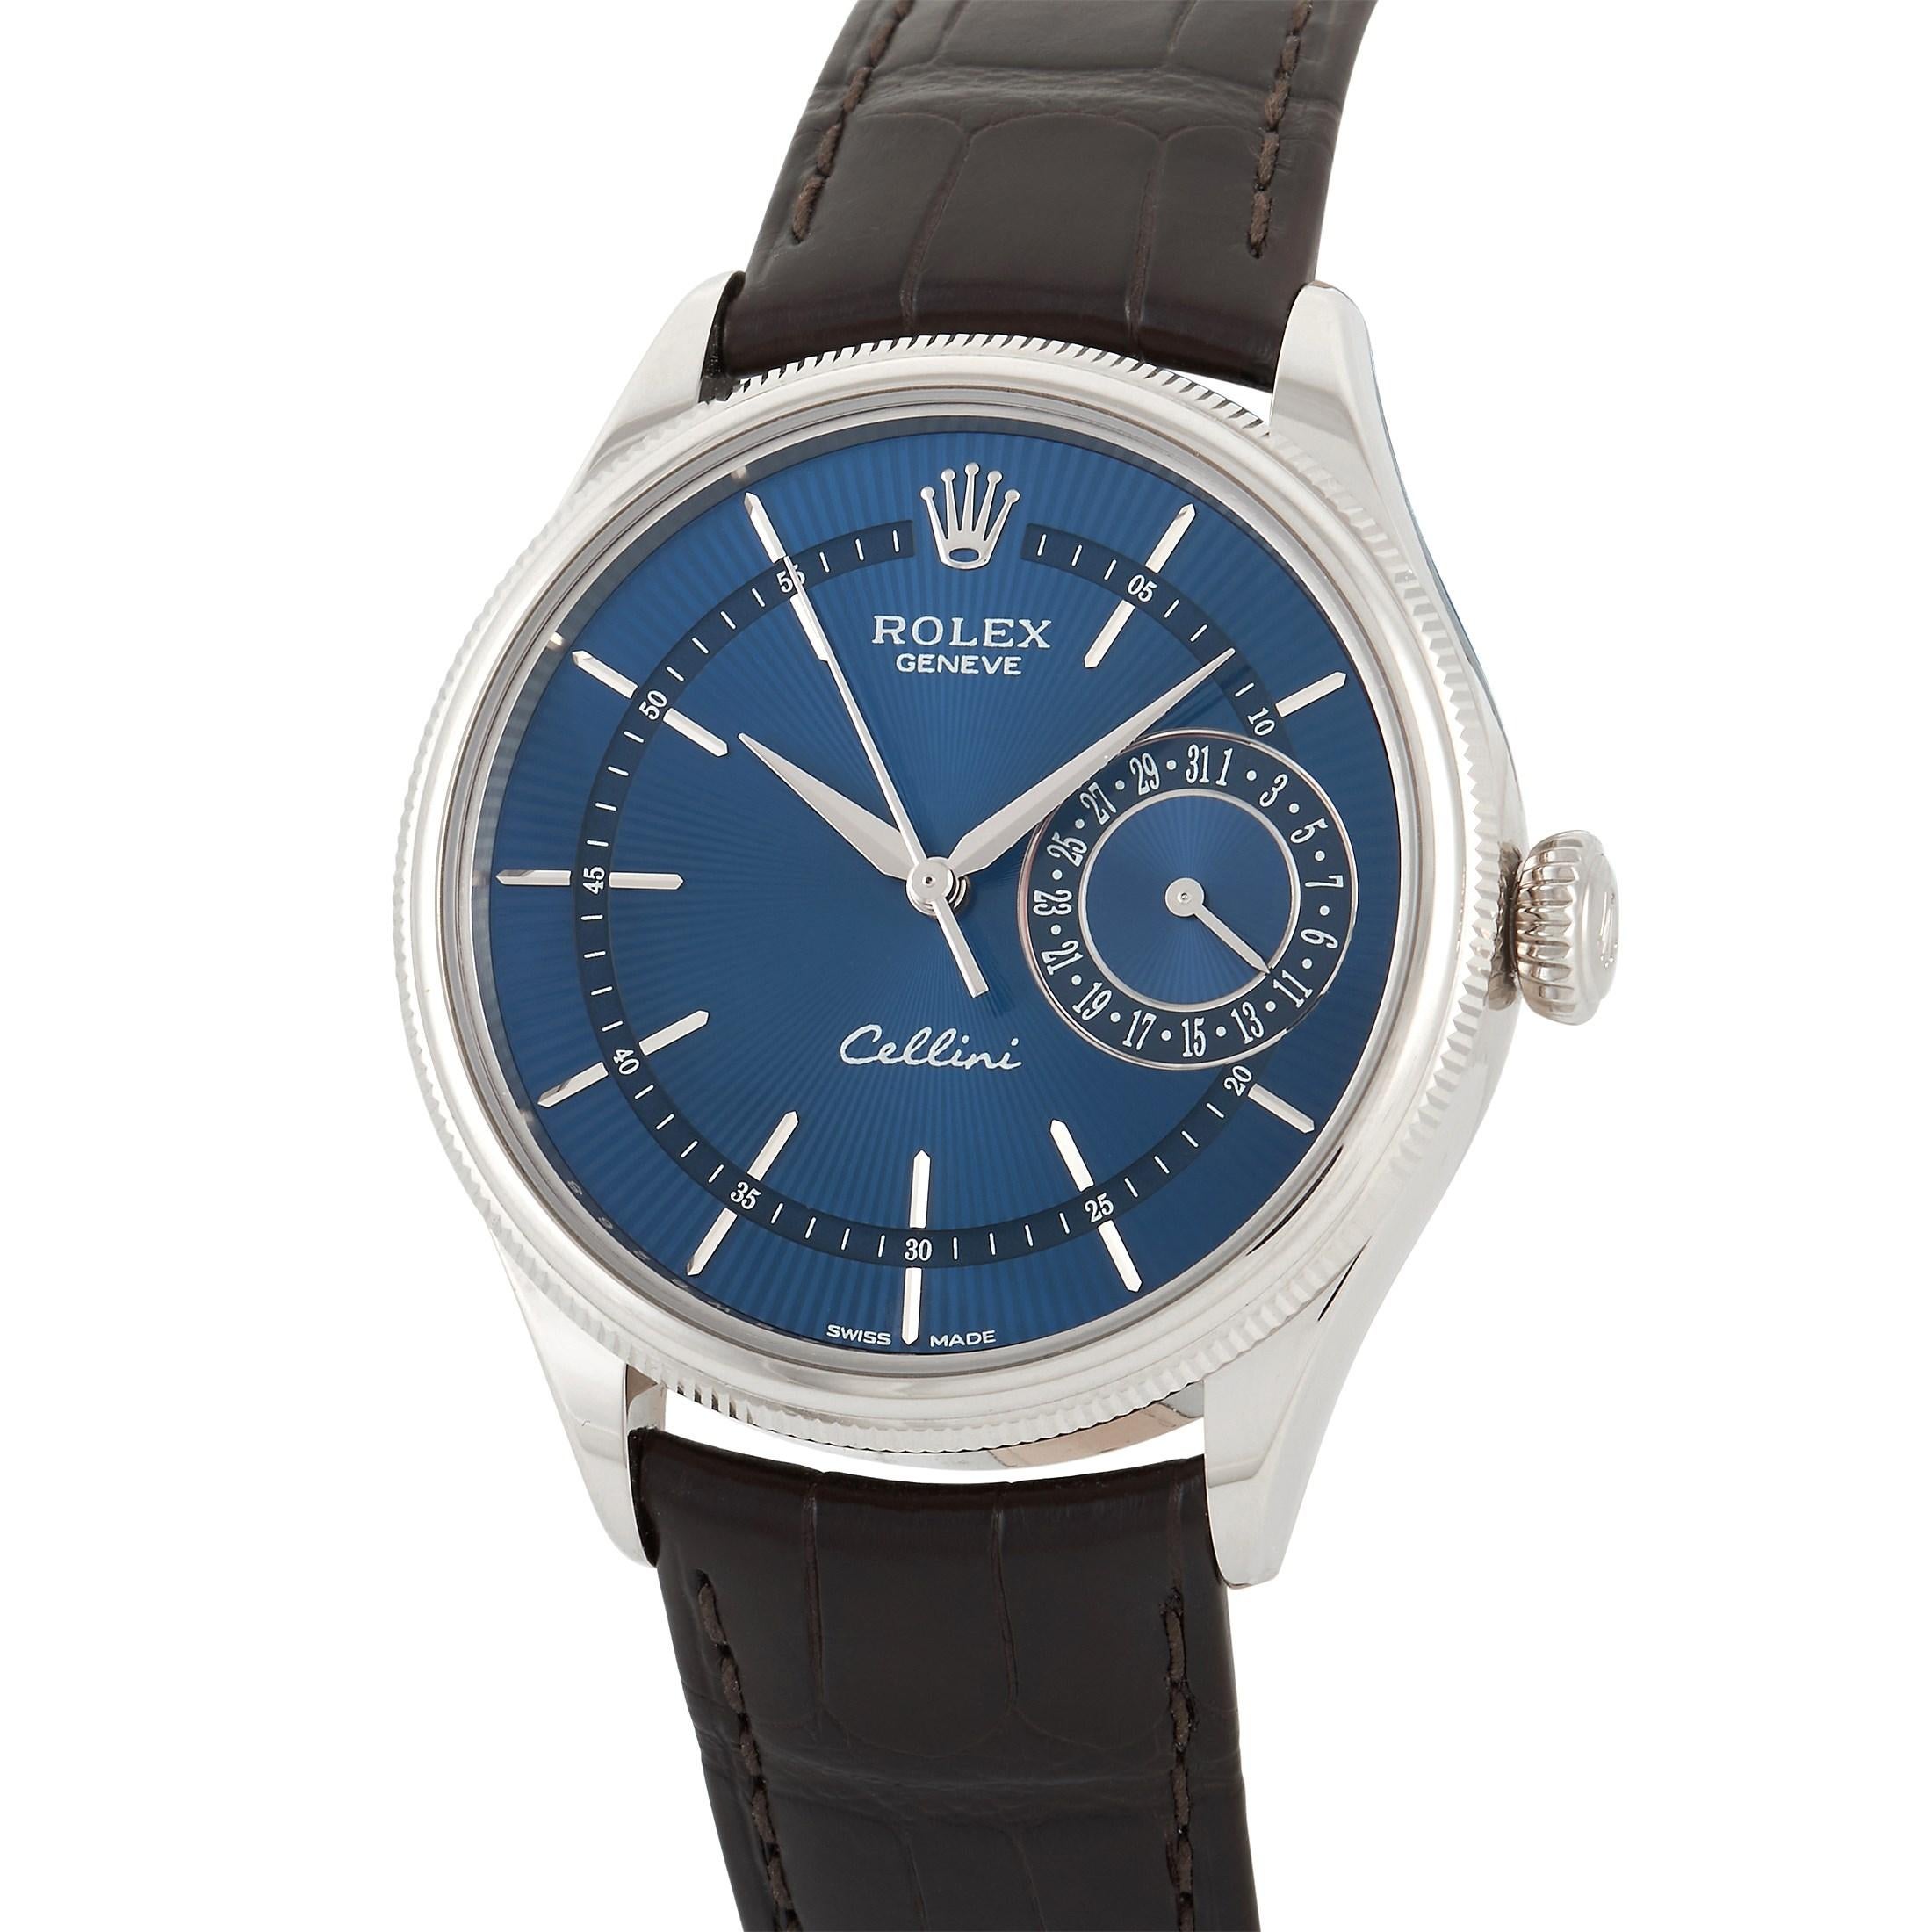 An exquisite dress watch for men, the Rolex Cellini Date White Gold 50519 embodies the luxury brand's attention to detail and fine craftsmanship. This gorgeous timepiece features an 18K white gold case, a two-tier white gold bezel, and a blue